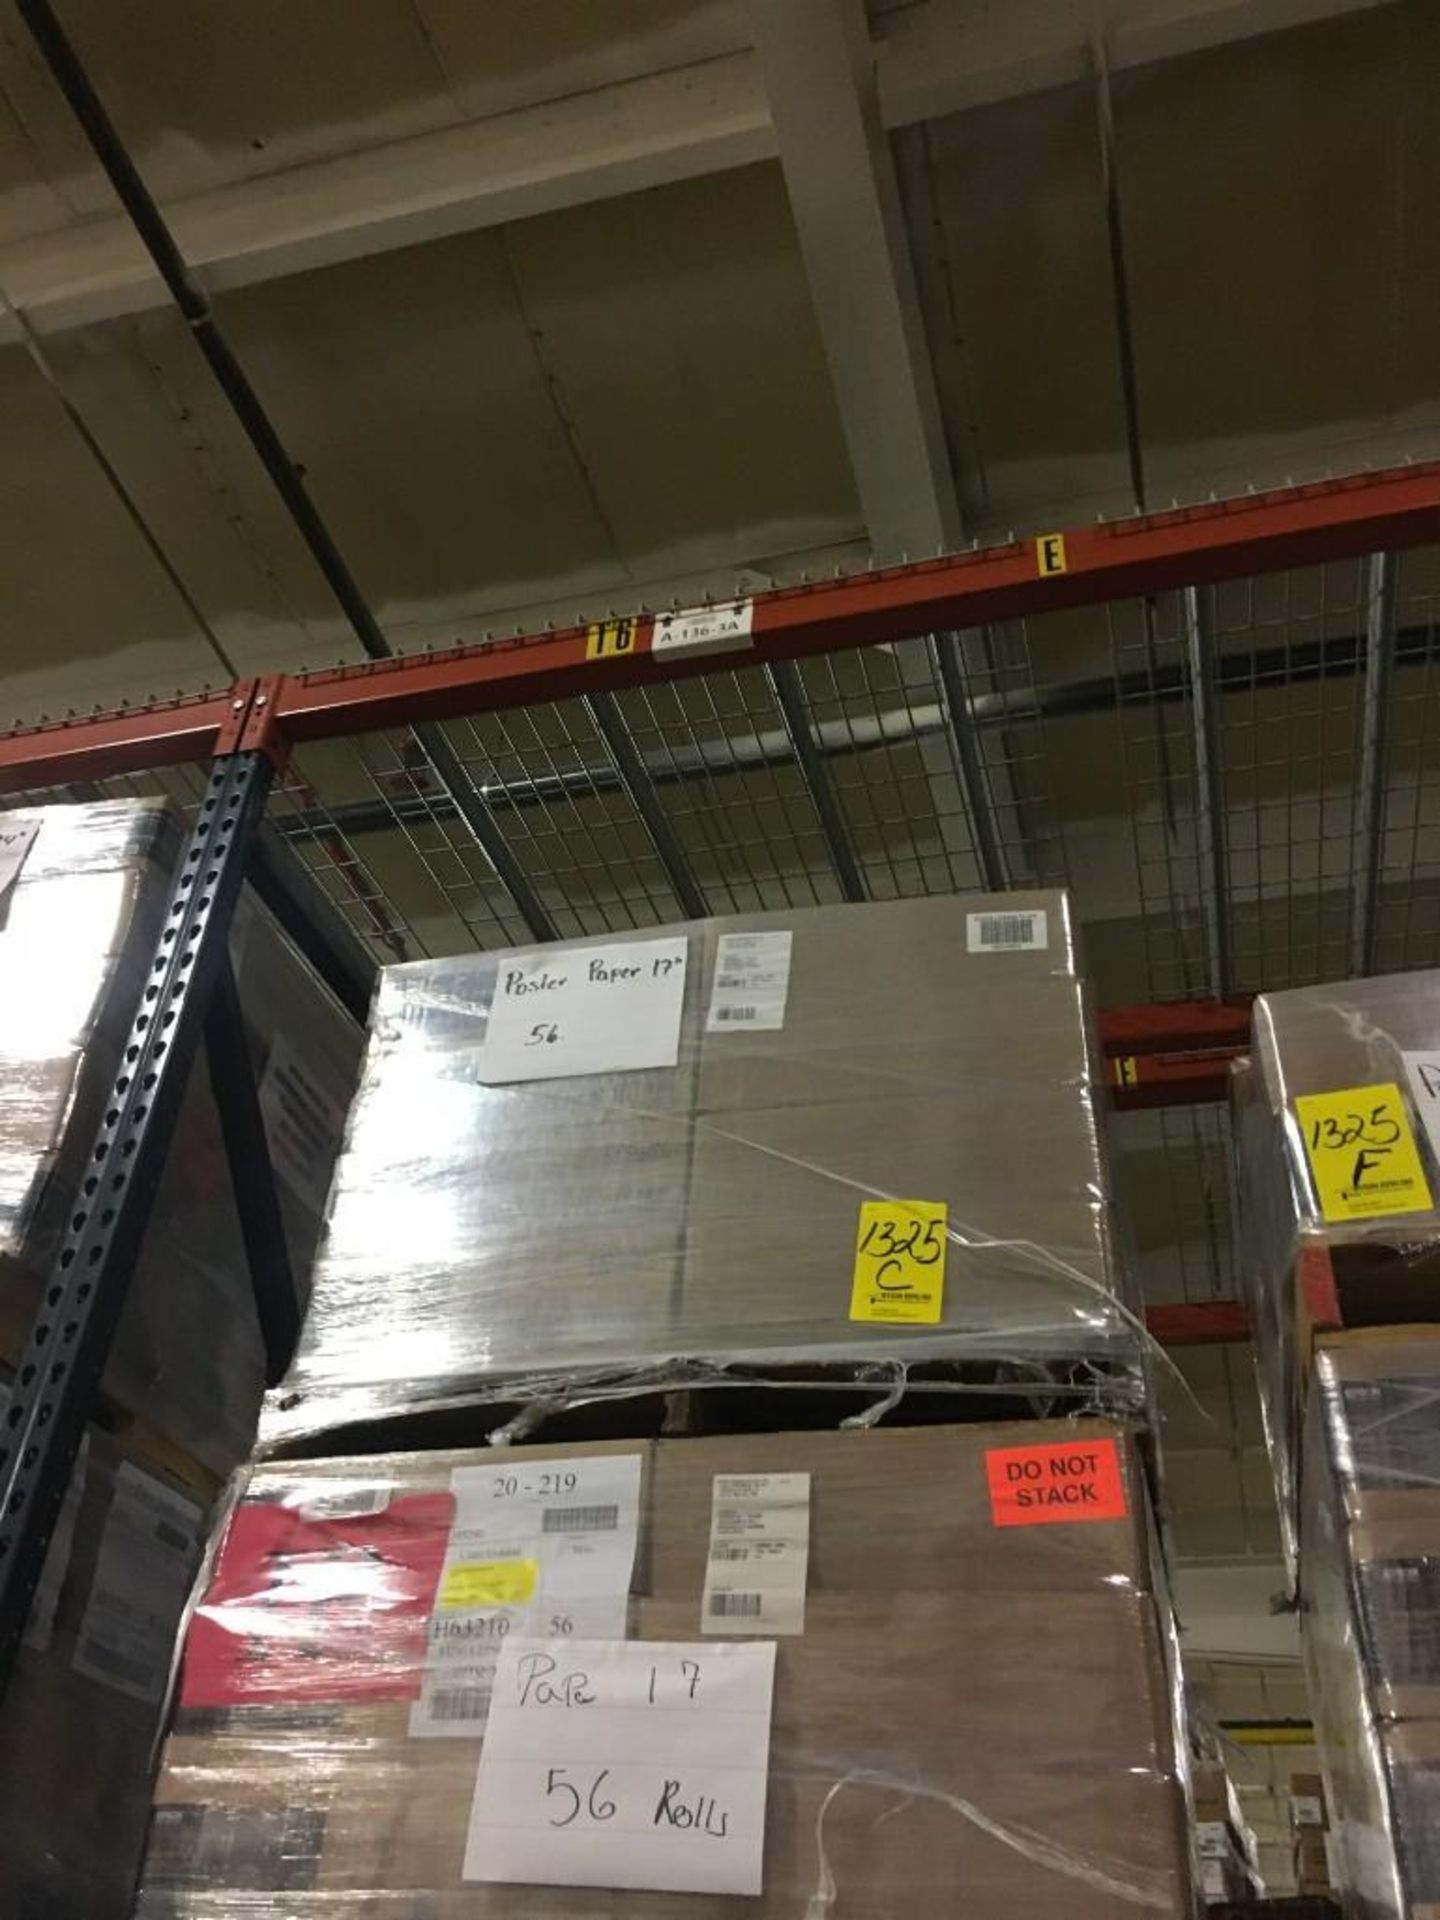 (56) BOXES OF EPSON 17 IN X 200 FT, (1) ROLL, POSTER PAPER, PRODUCTION (175)